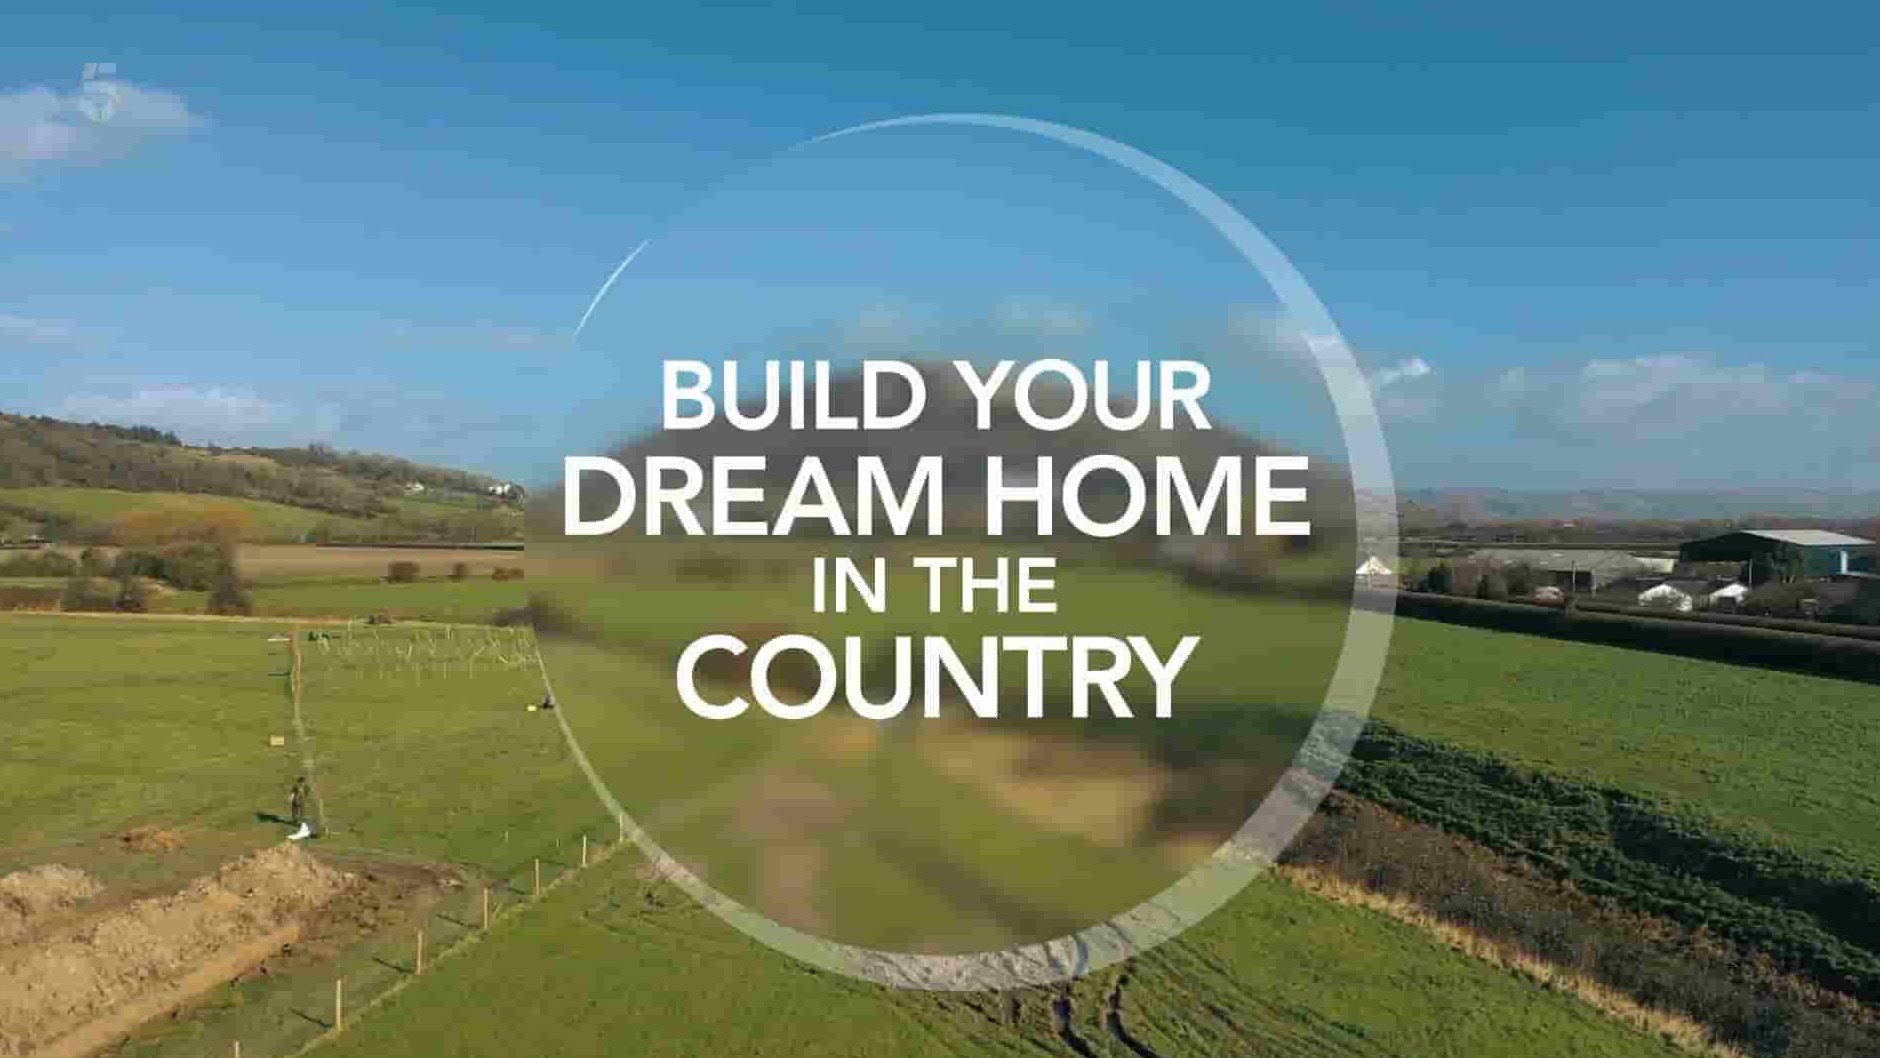 Ch5纪录片《在乡村建造梦想家园 Build Your Dream Home in the Country 2023》全10集 英语中英双字 1080P高清网盘下载